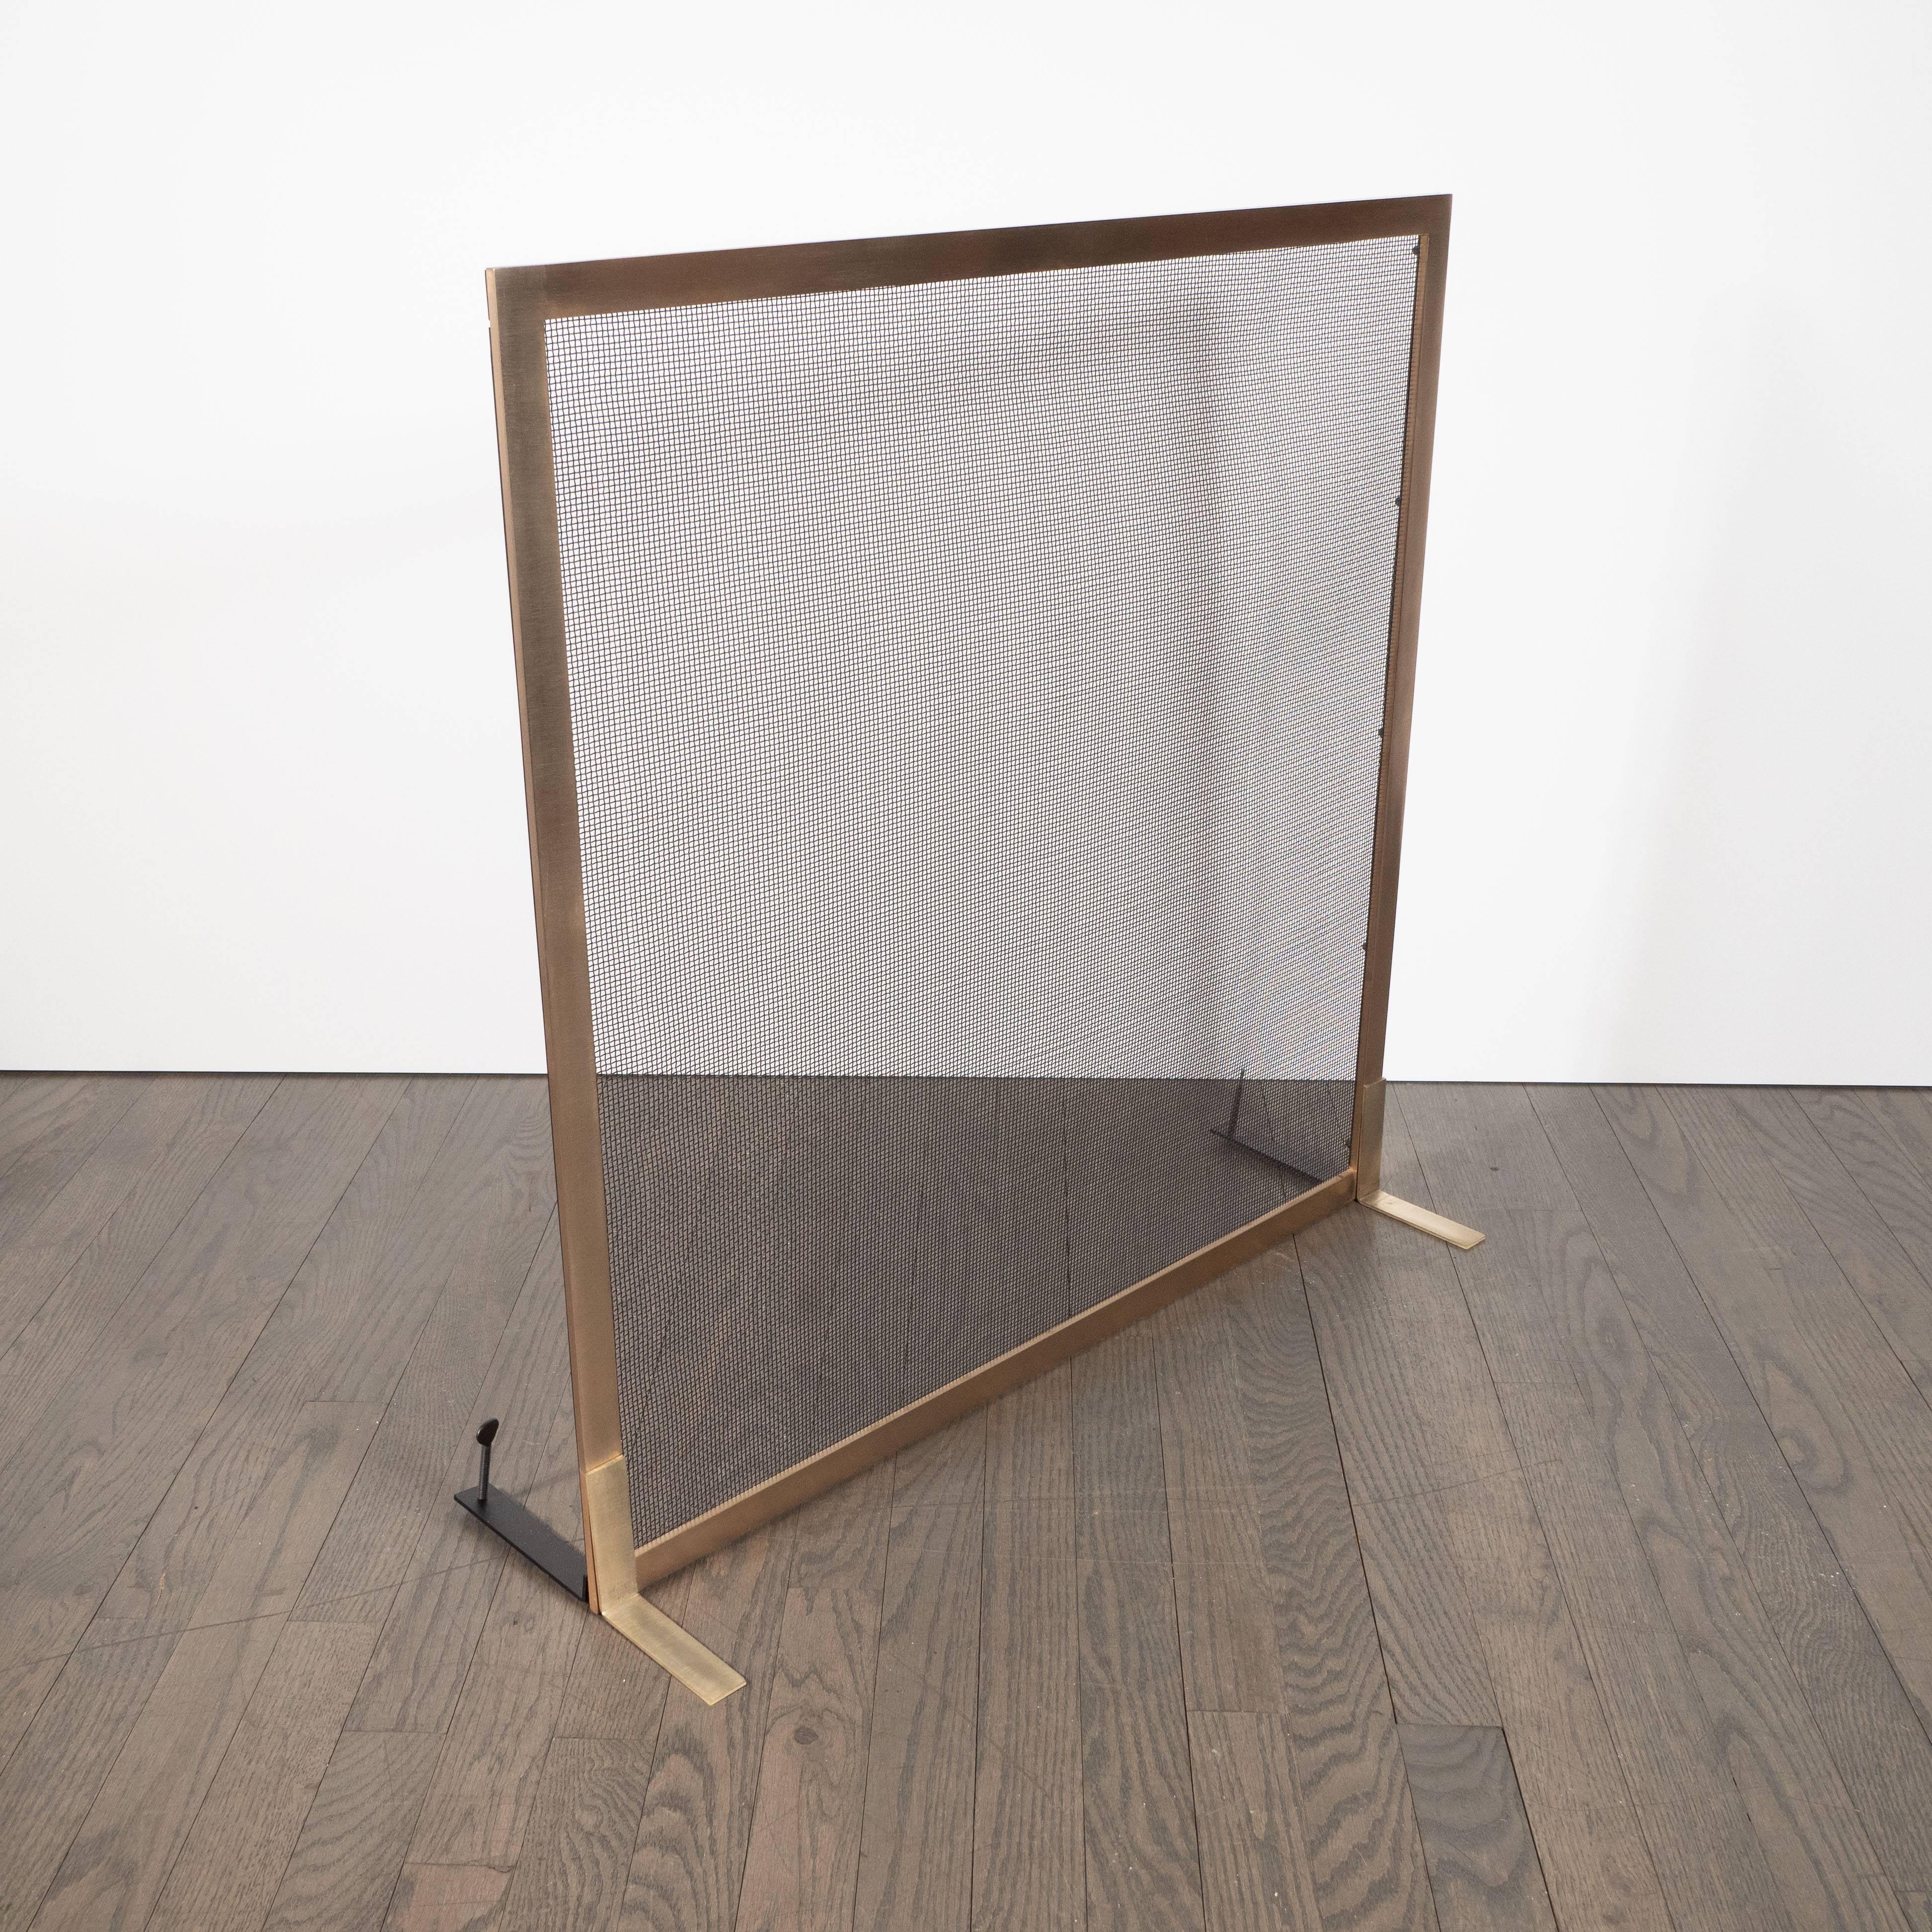 American Modernist Custom-Made Fire Screen in Brushed Brass with Iron Mesh Grill For Sale